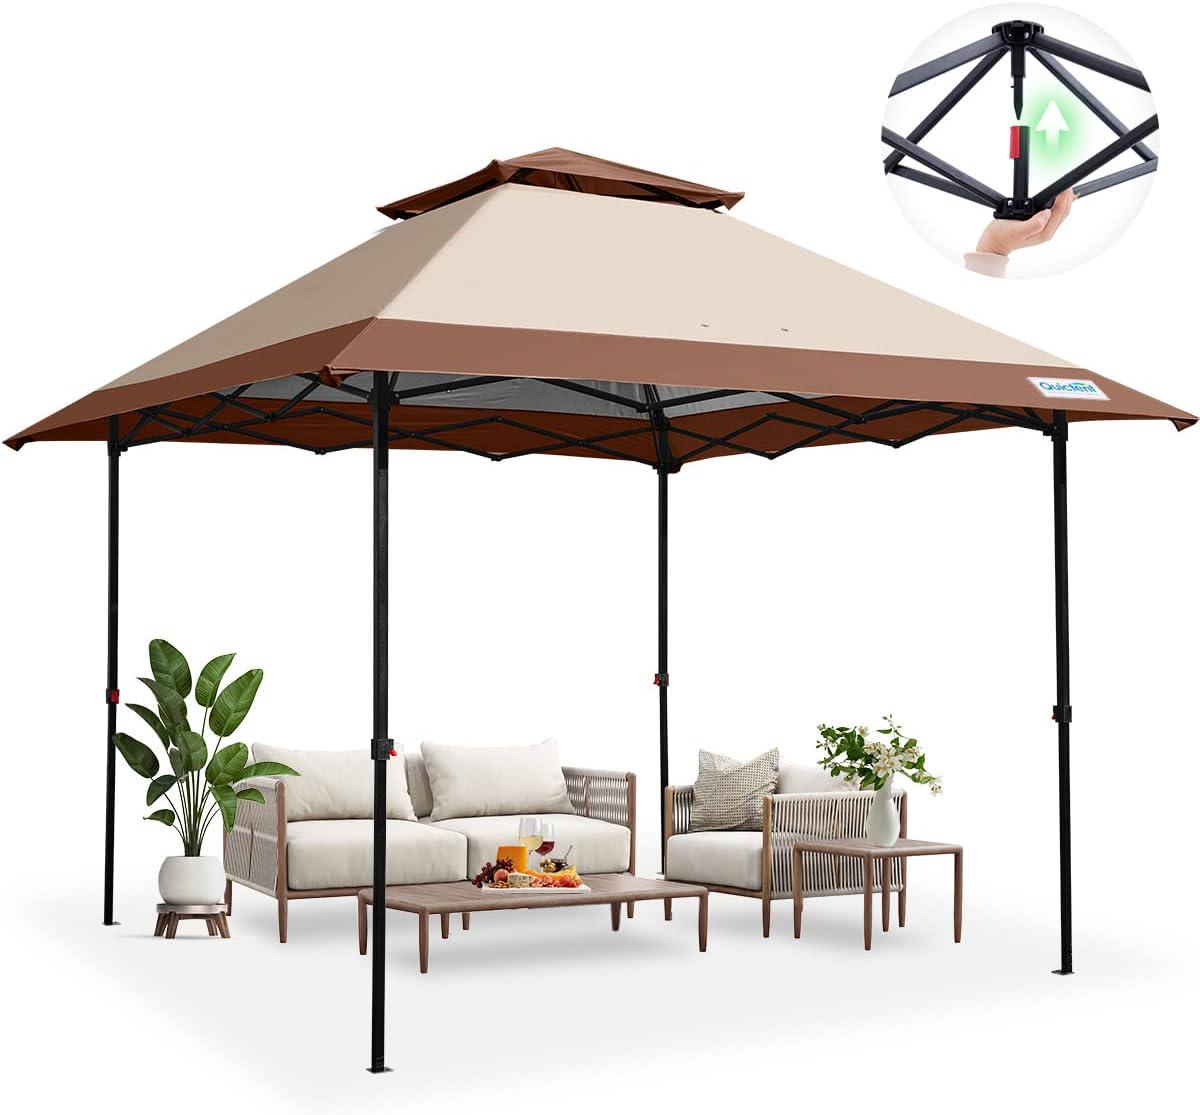 Quictent 10x10 Pop up Canopy Tent Instant Outdoor Canopy Tent Ez up Canopy Shade,Beige/Khaki-